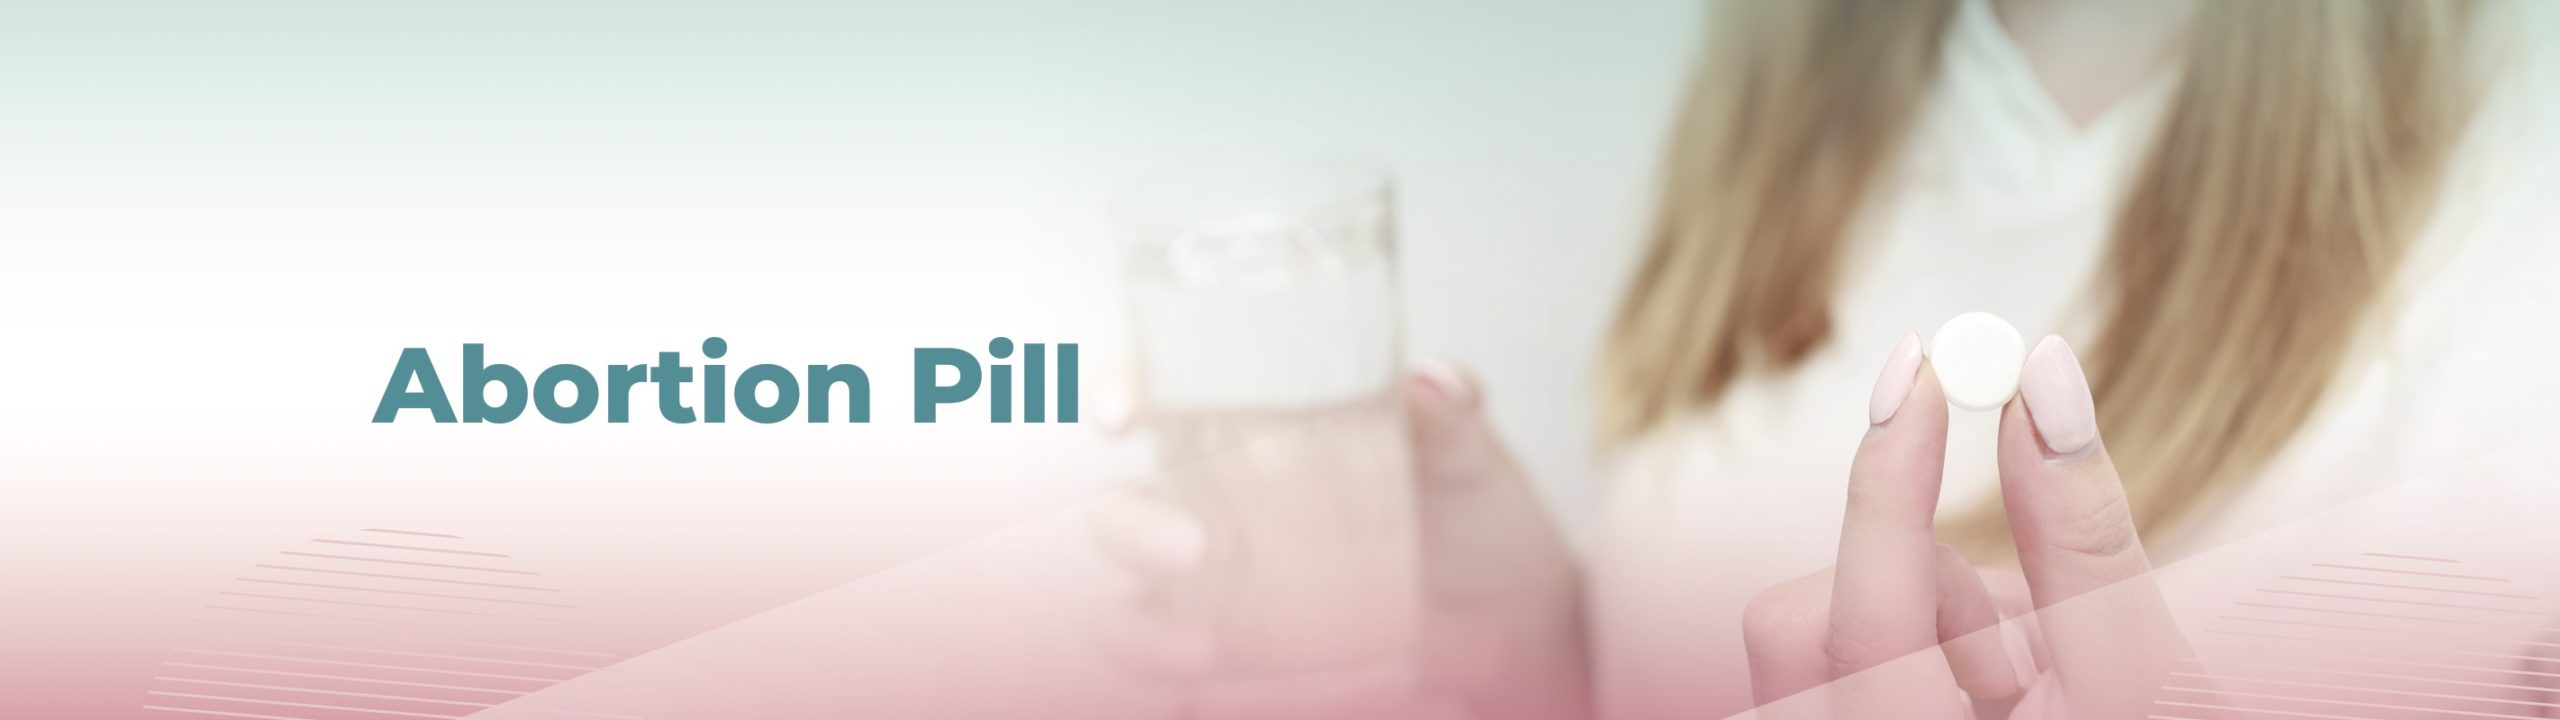 A blond woman with pink nail polish holds an abortion pill and a glass of water